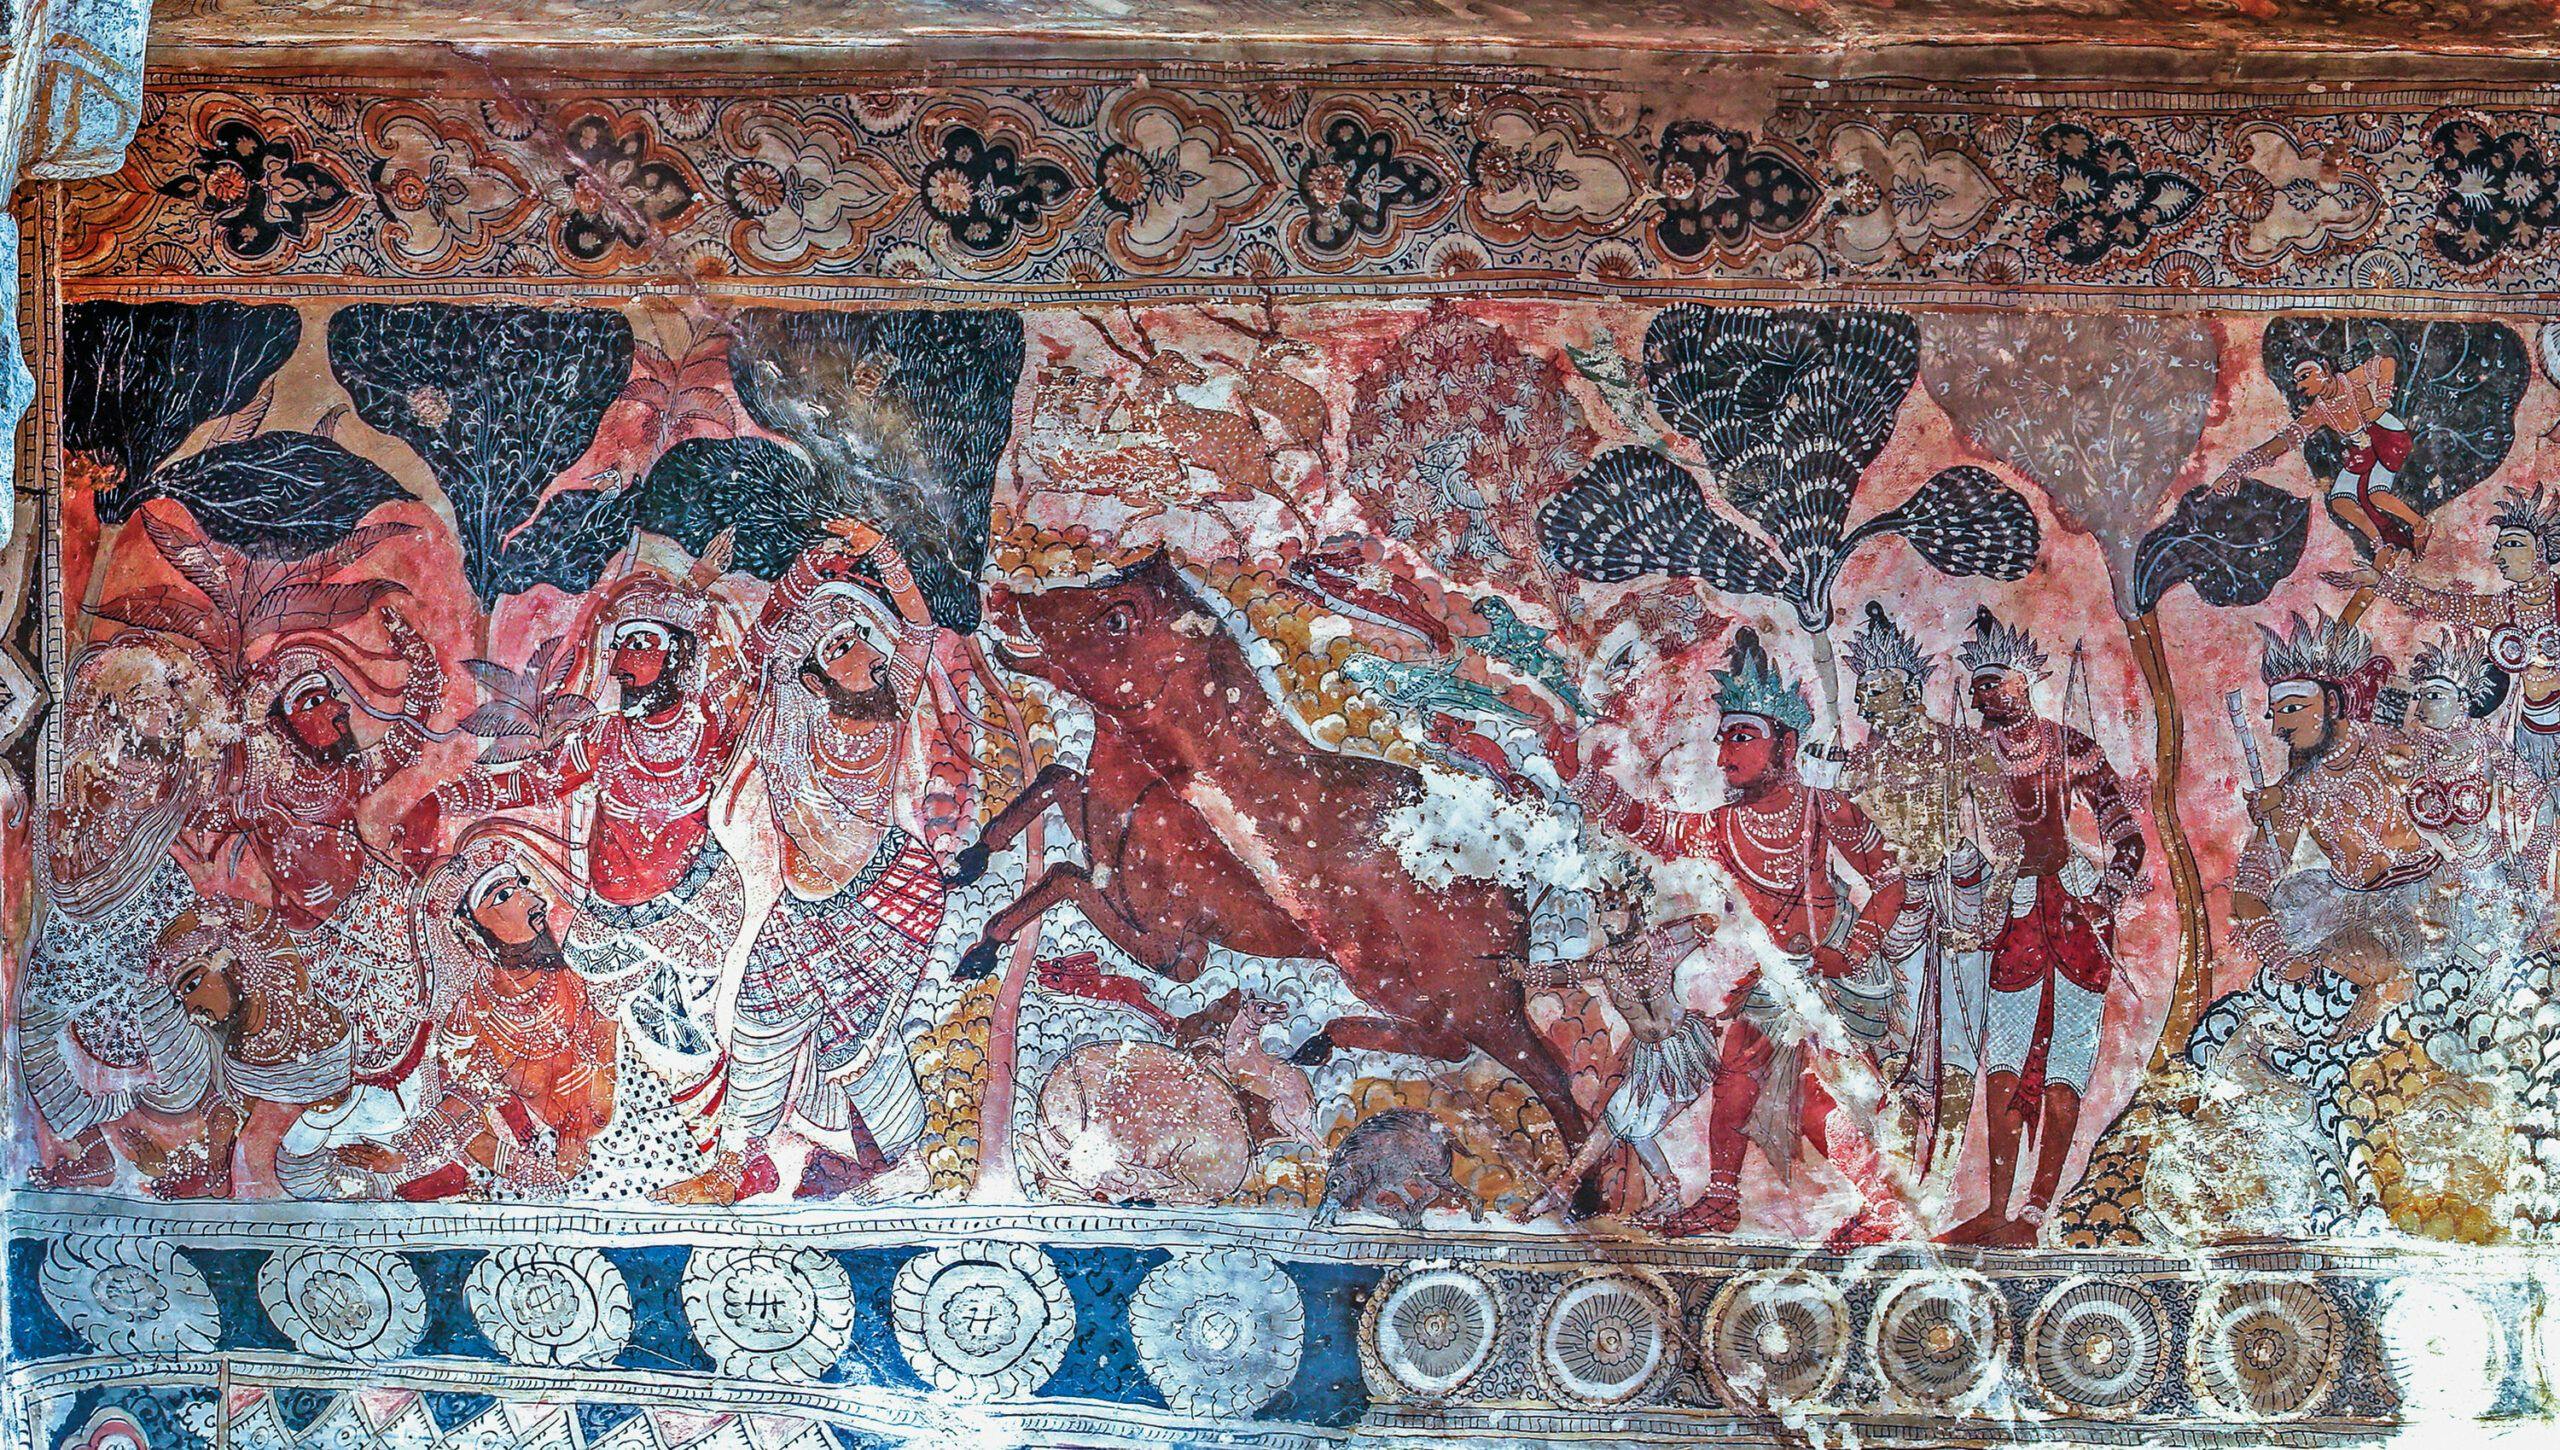 Panel A7, Scene 15, detail of 'Shiva and Parvati accompanied by their retinue'